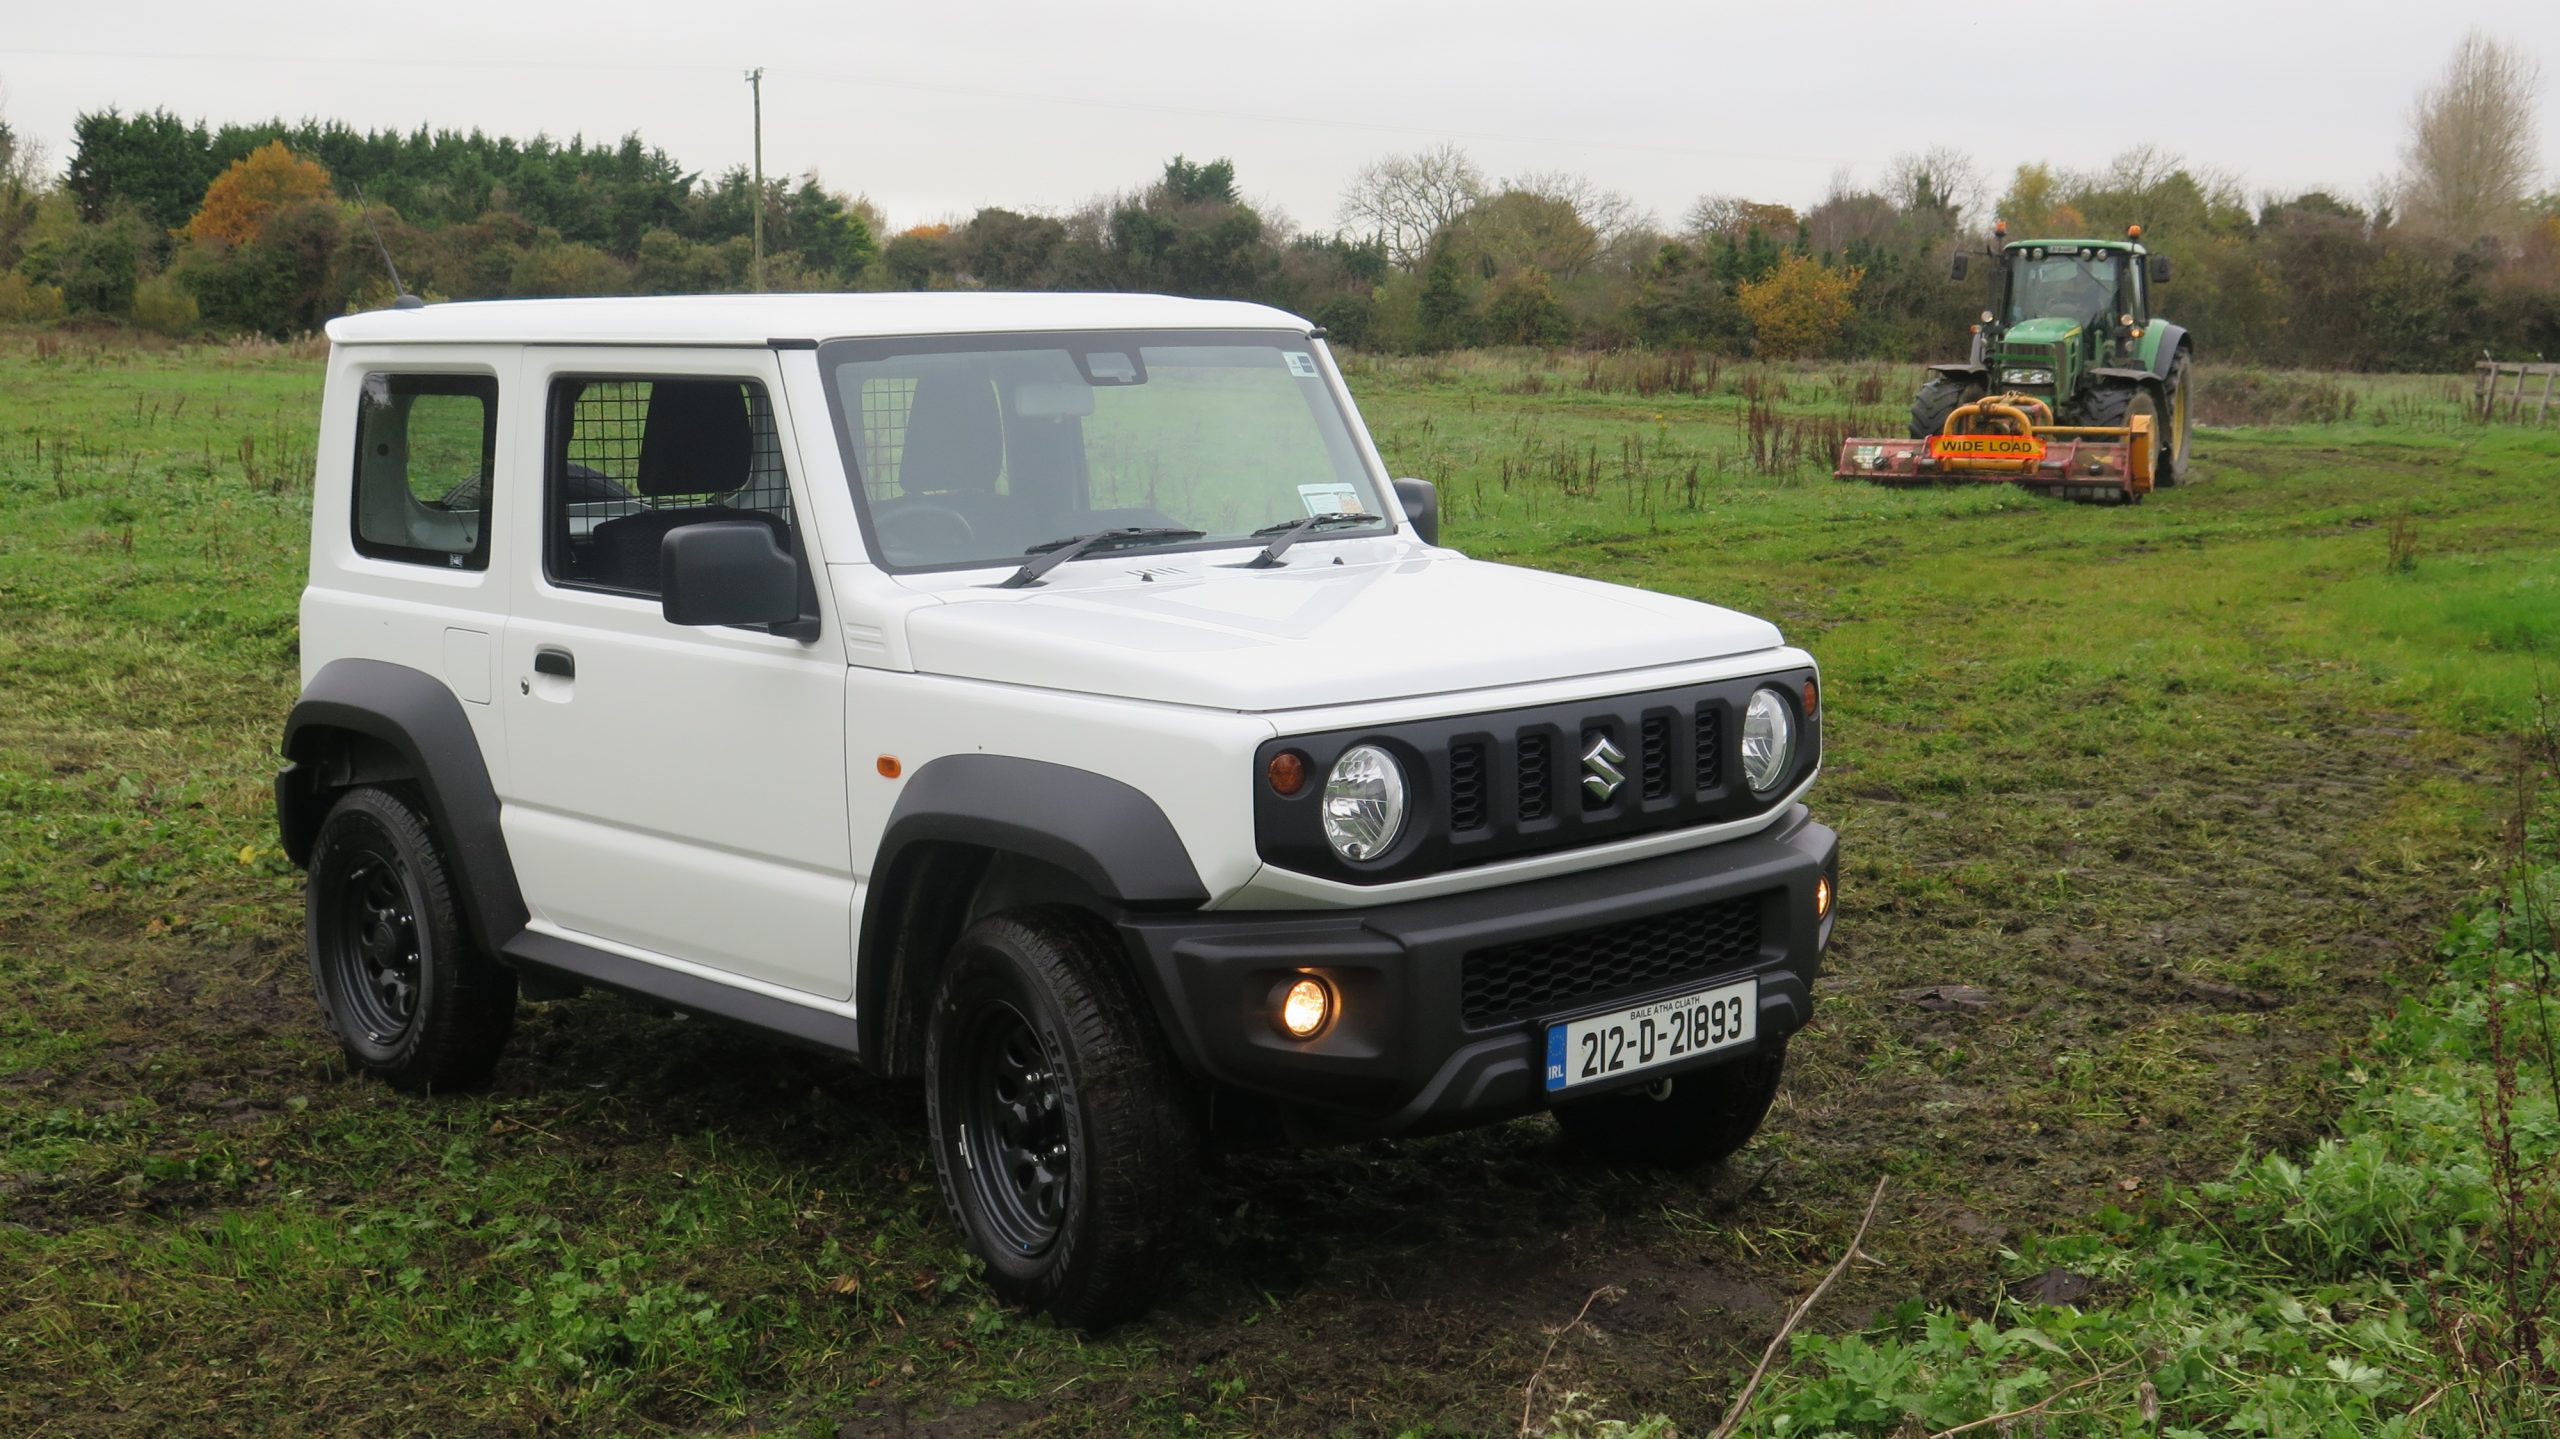 Suzuki's new Jimny commercial delivers fun over function – Wheels and Fields